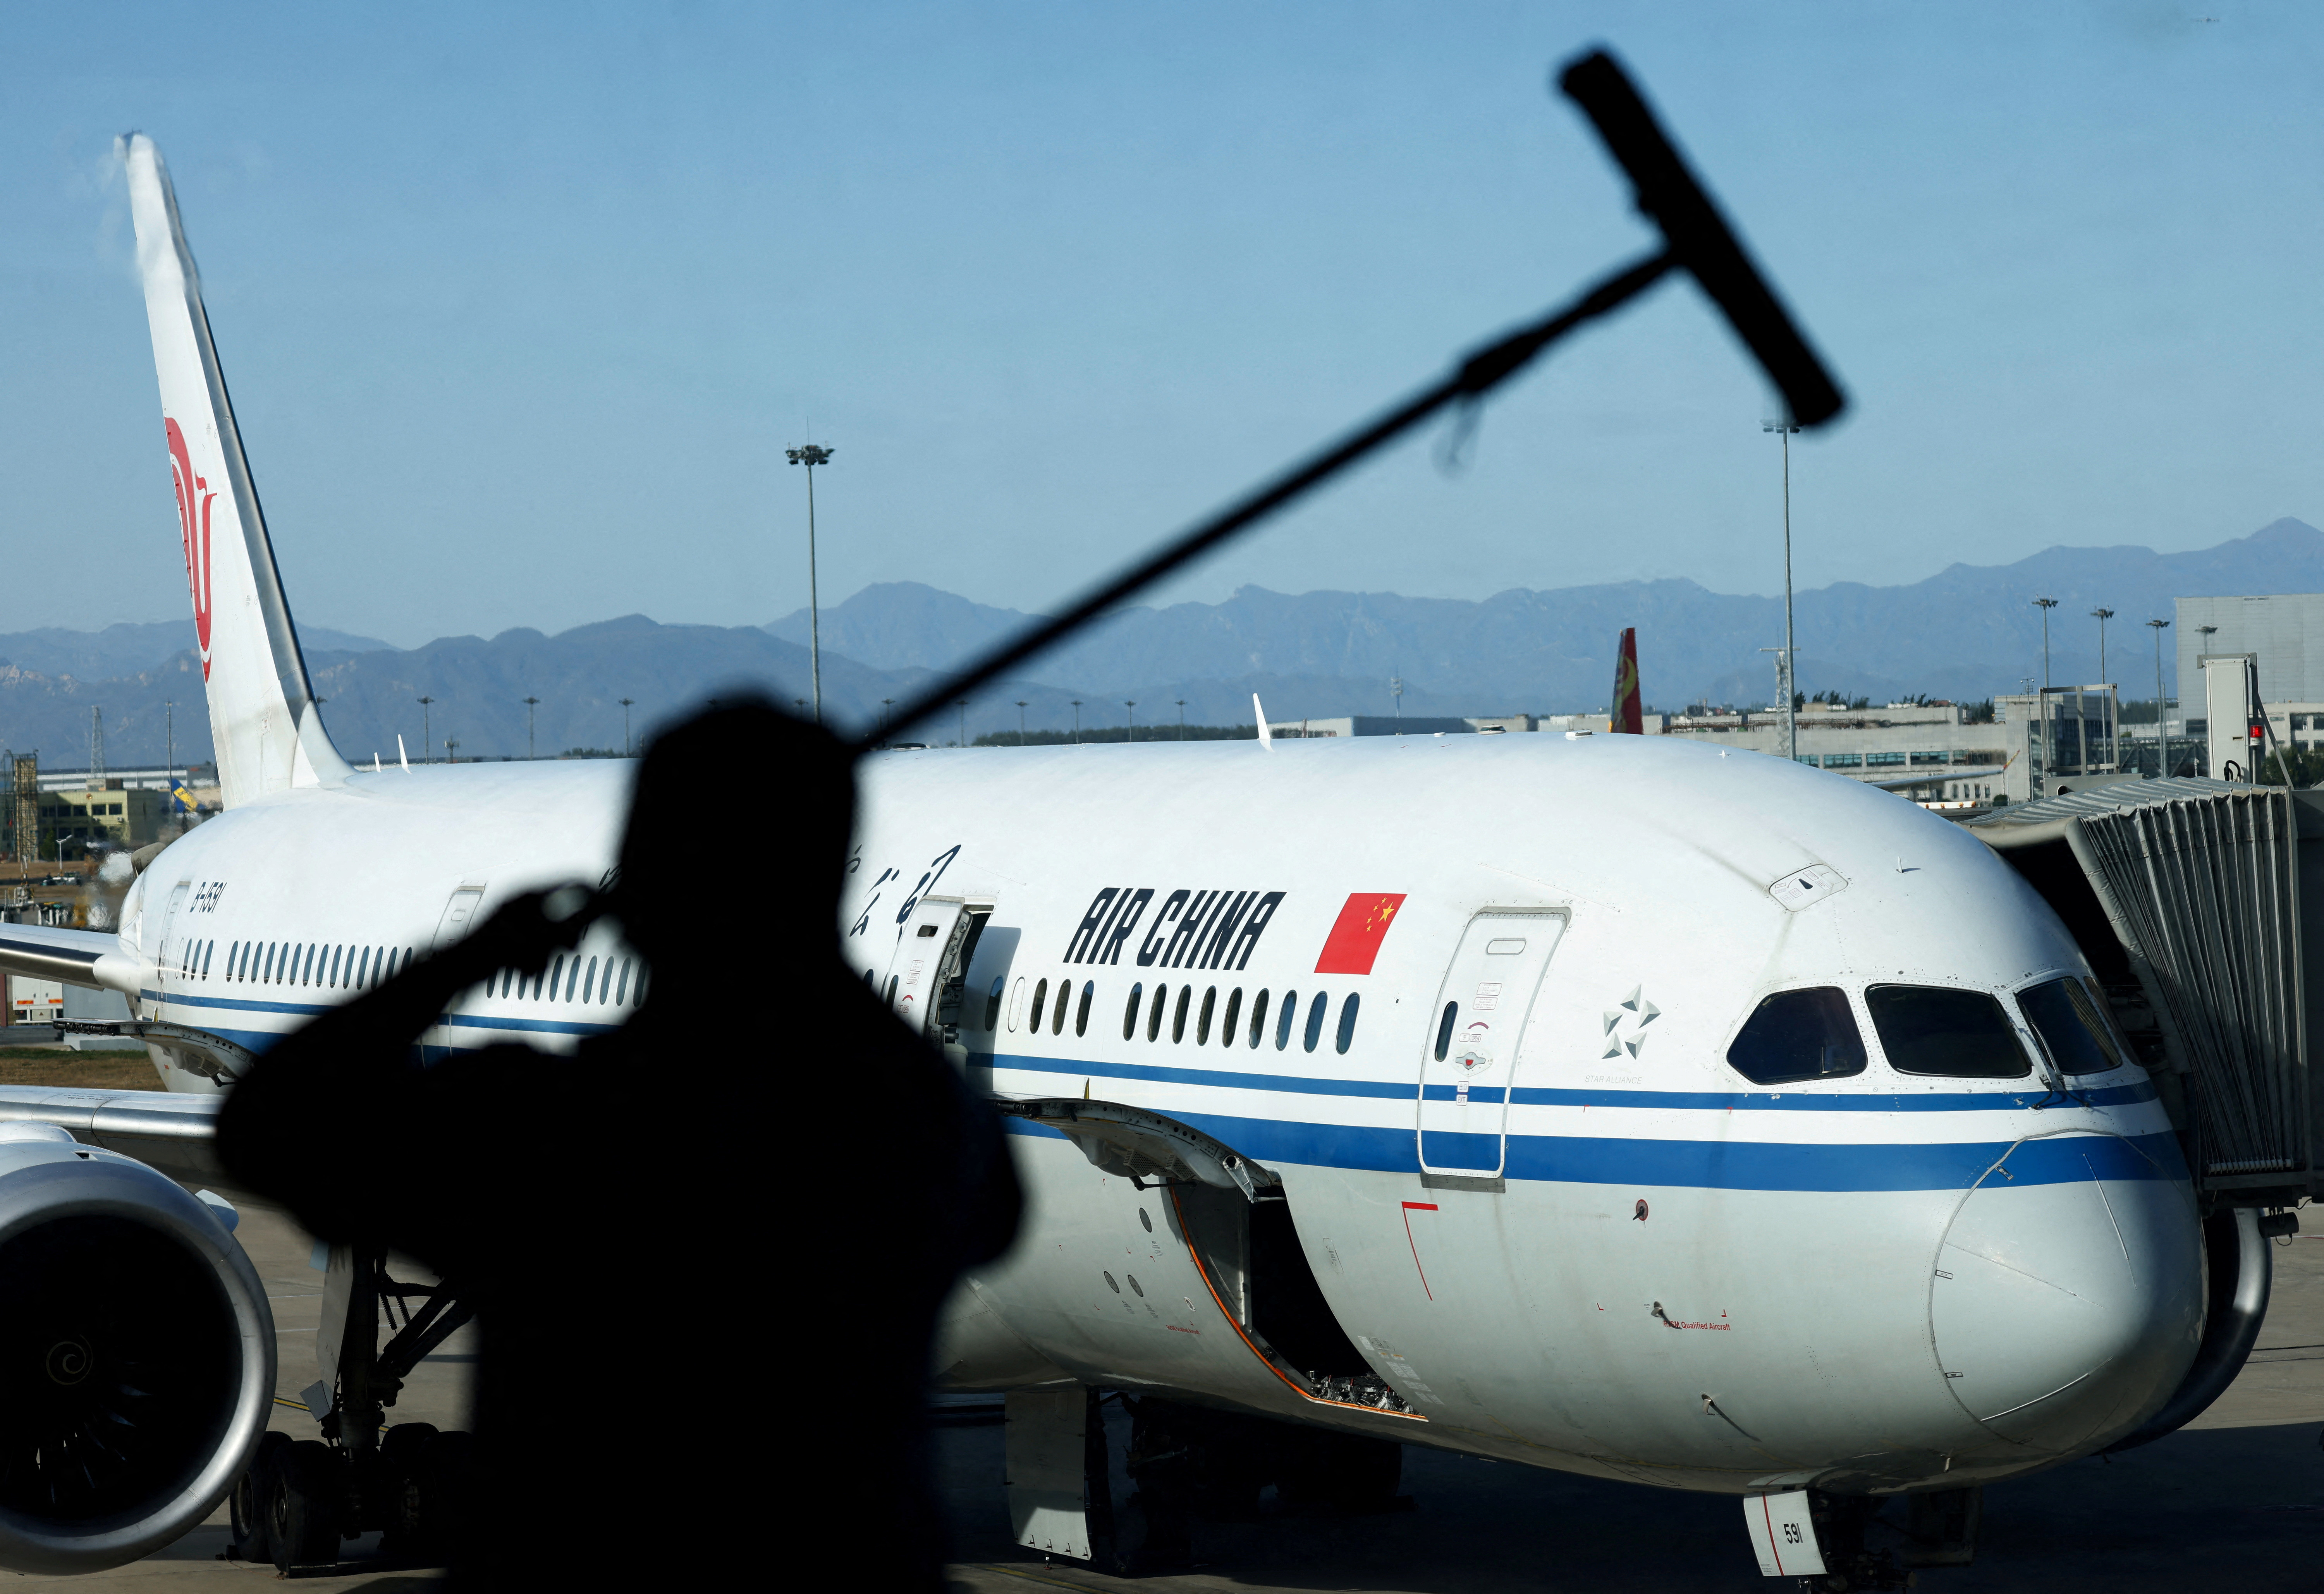 An Air China plane is seen at the international airport in Beijing